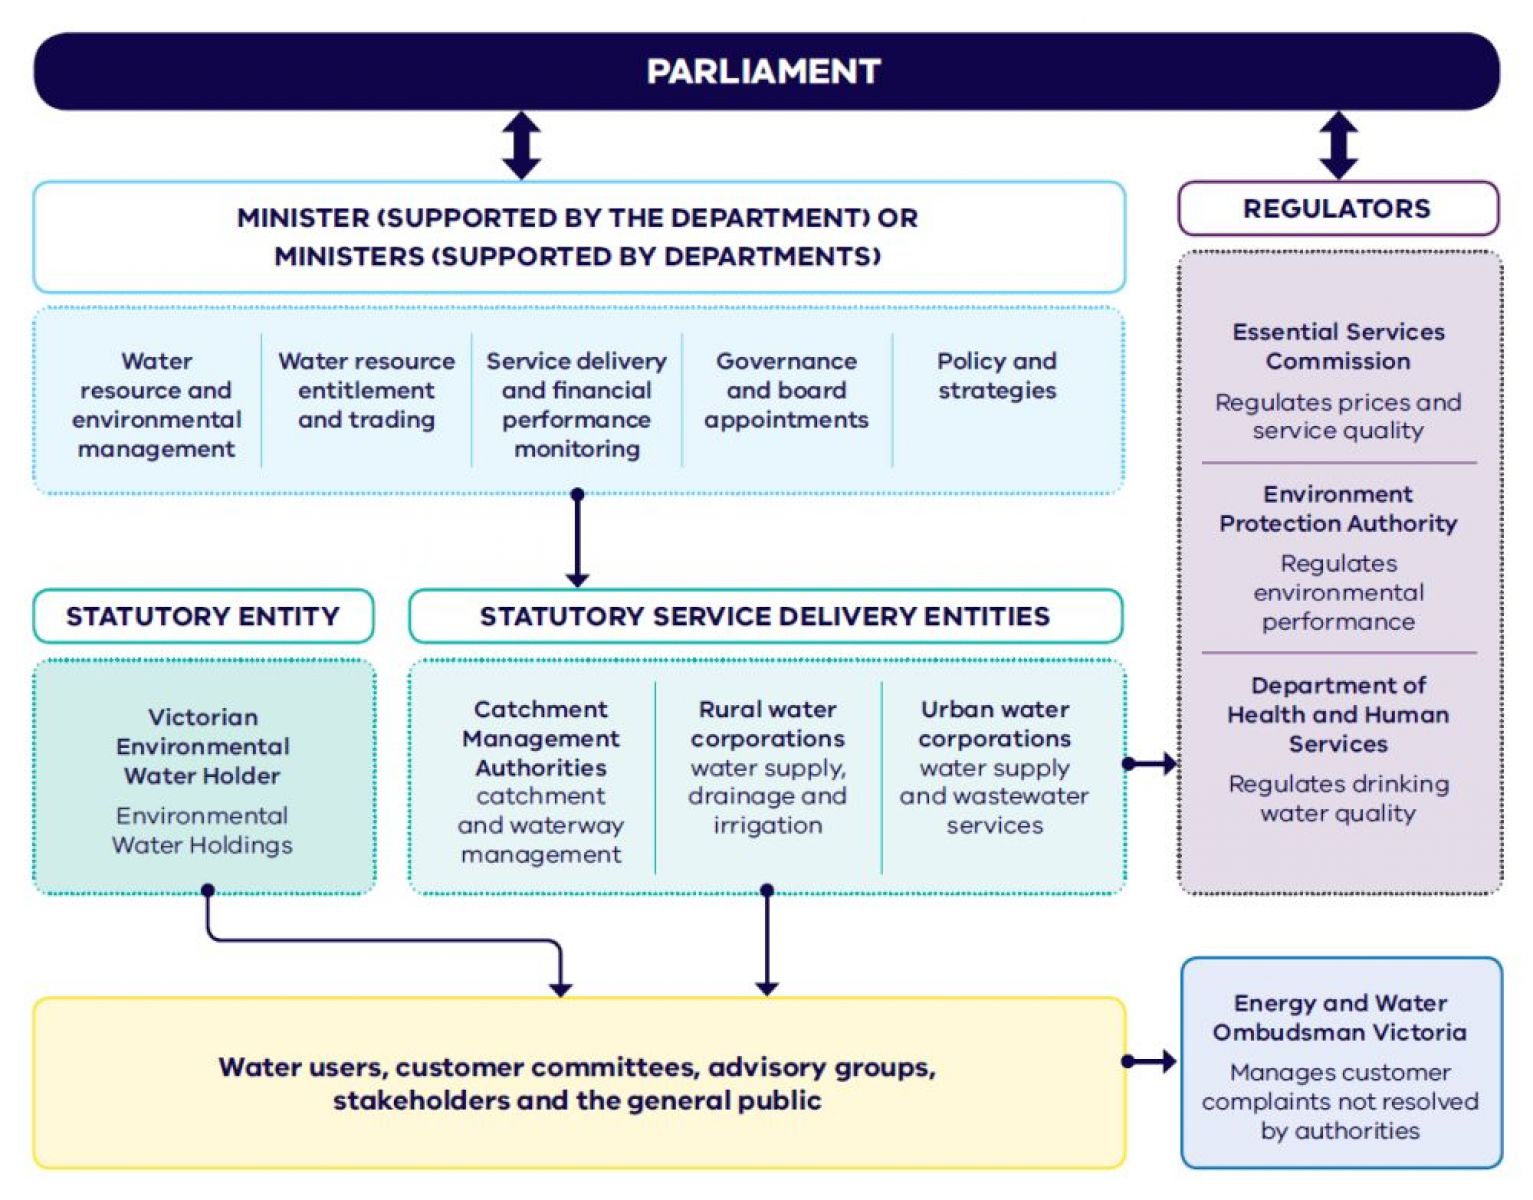 Diagram detailing how parliament, the Minister, statutory entity, statutory service delivery entities, water users, customers, advisory, groups, stakeholders and the public, Energy and Water Ombudsman Victoria and regulators – Essential Services Commission, Environment Protection Authority and Department of Health and Human Services work together. 